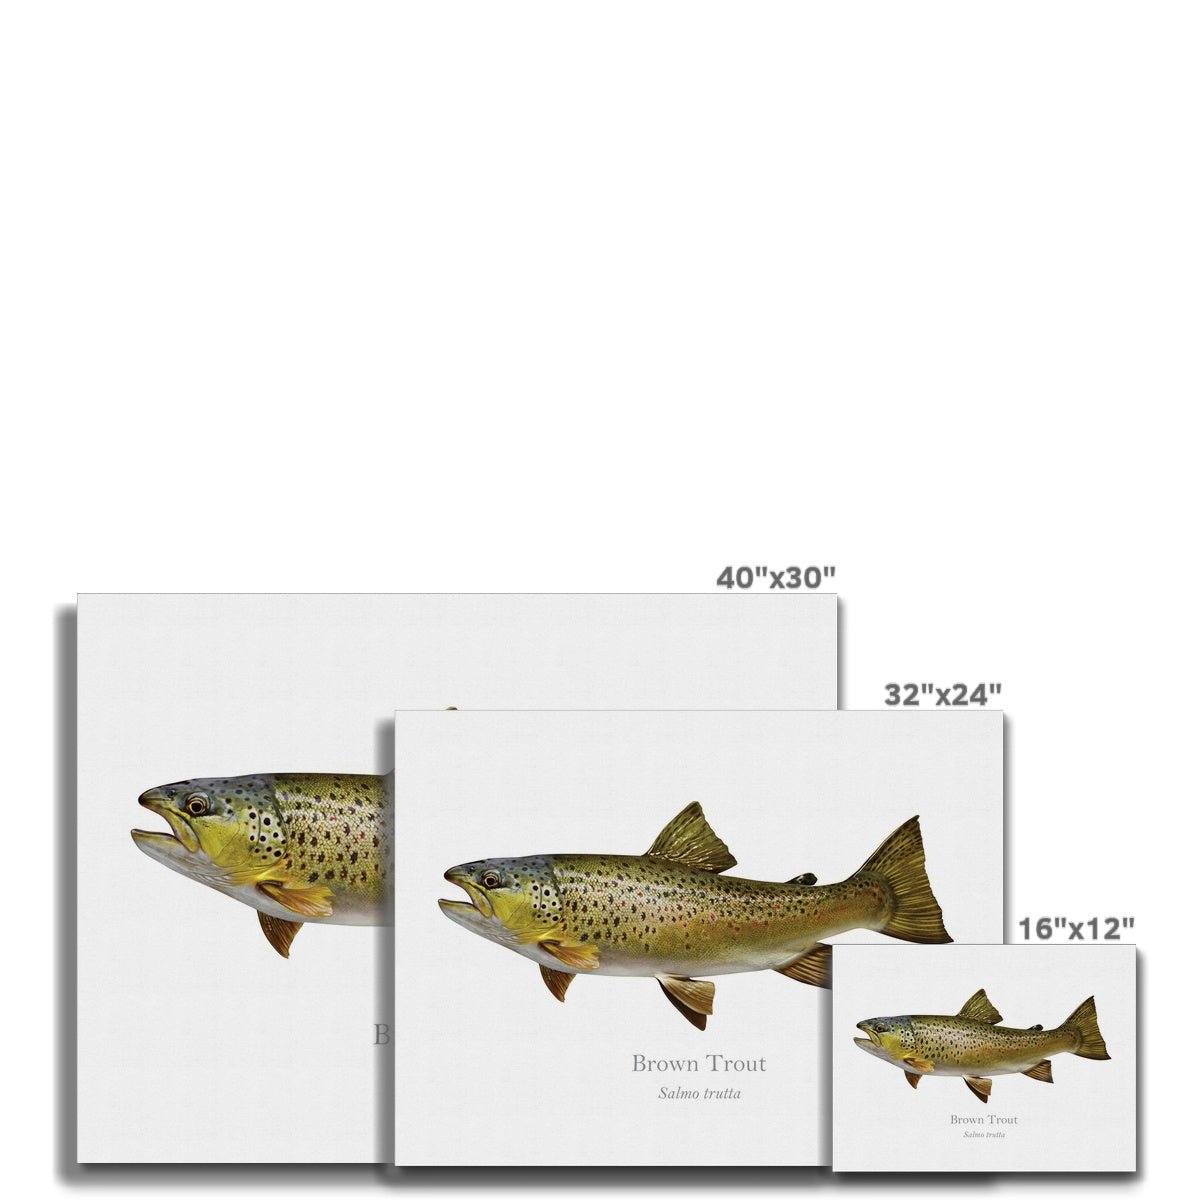 Brown Trout - Canvas Print - With Scientific Name - madfishlab.com